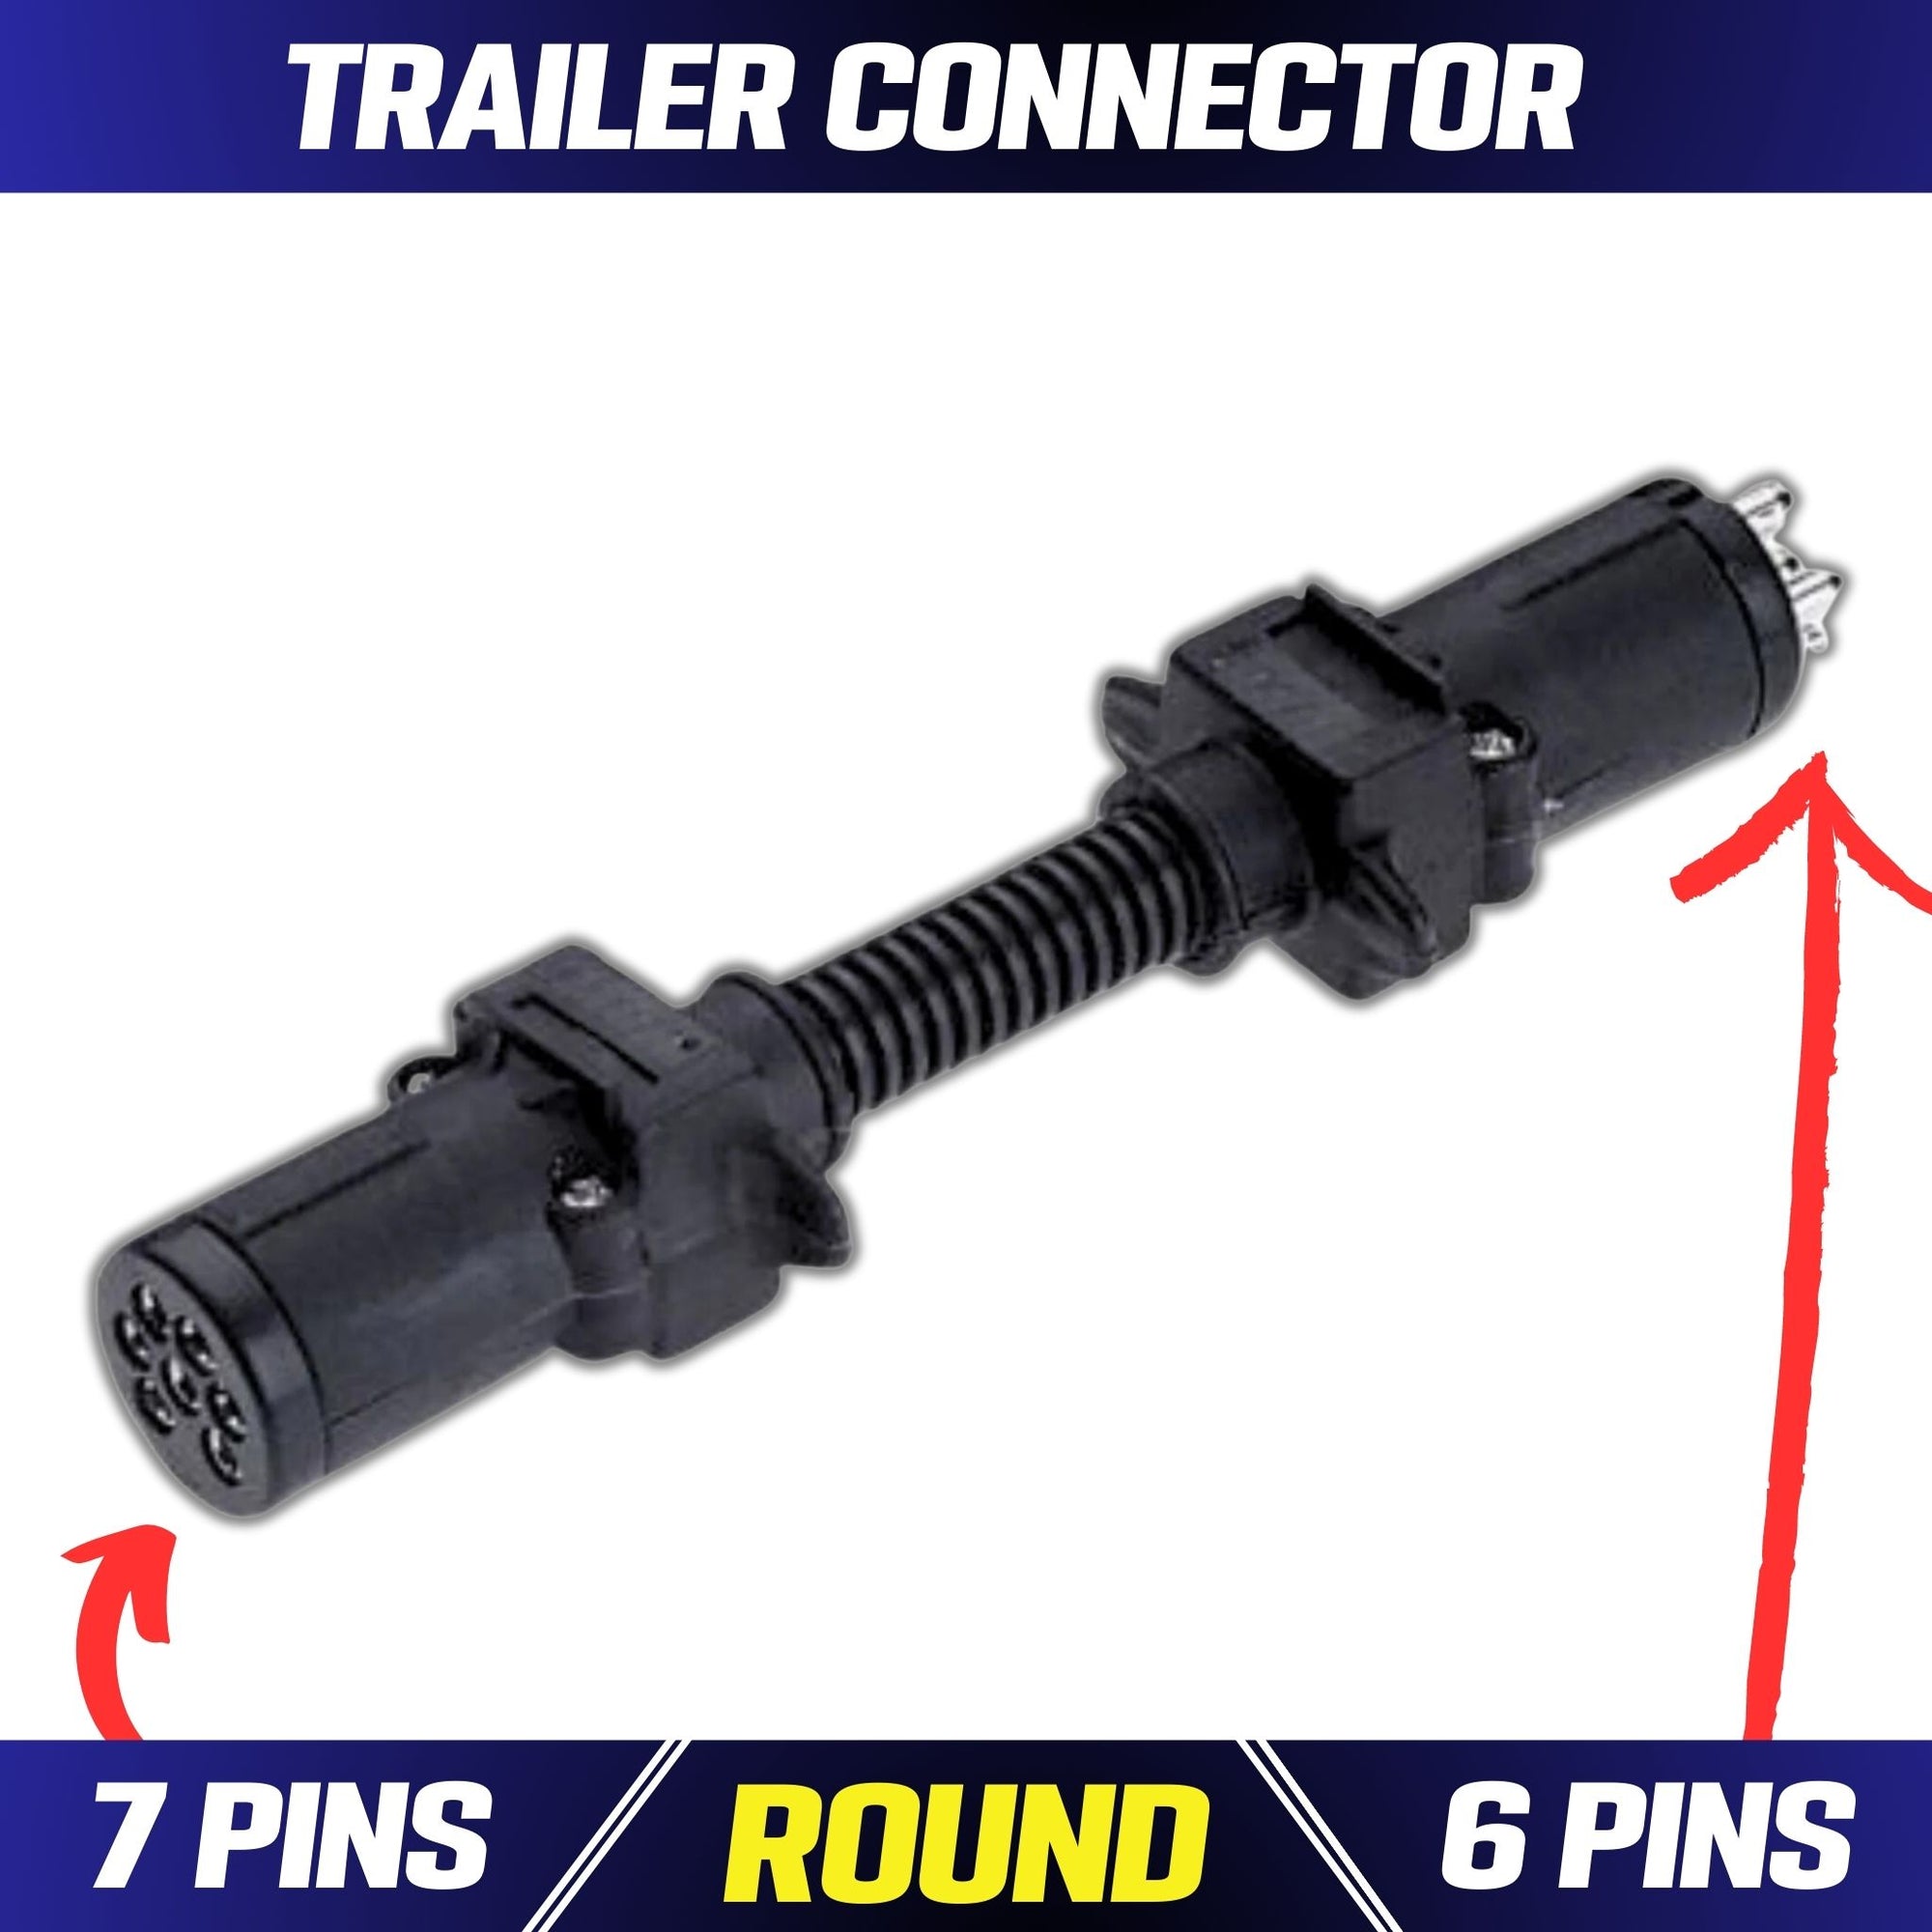 6 Pin Trailer Plug Connector | 6 Pin Small Round Socket on car to 7 Pin Small Round Plug on Trailer | TC136B - South East Clearance Centre